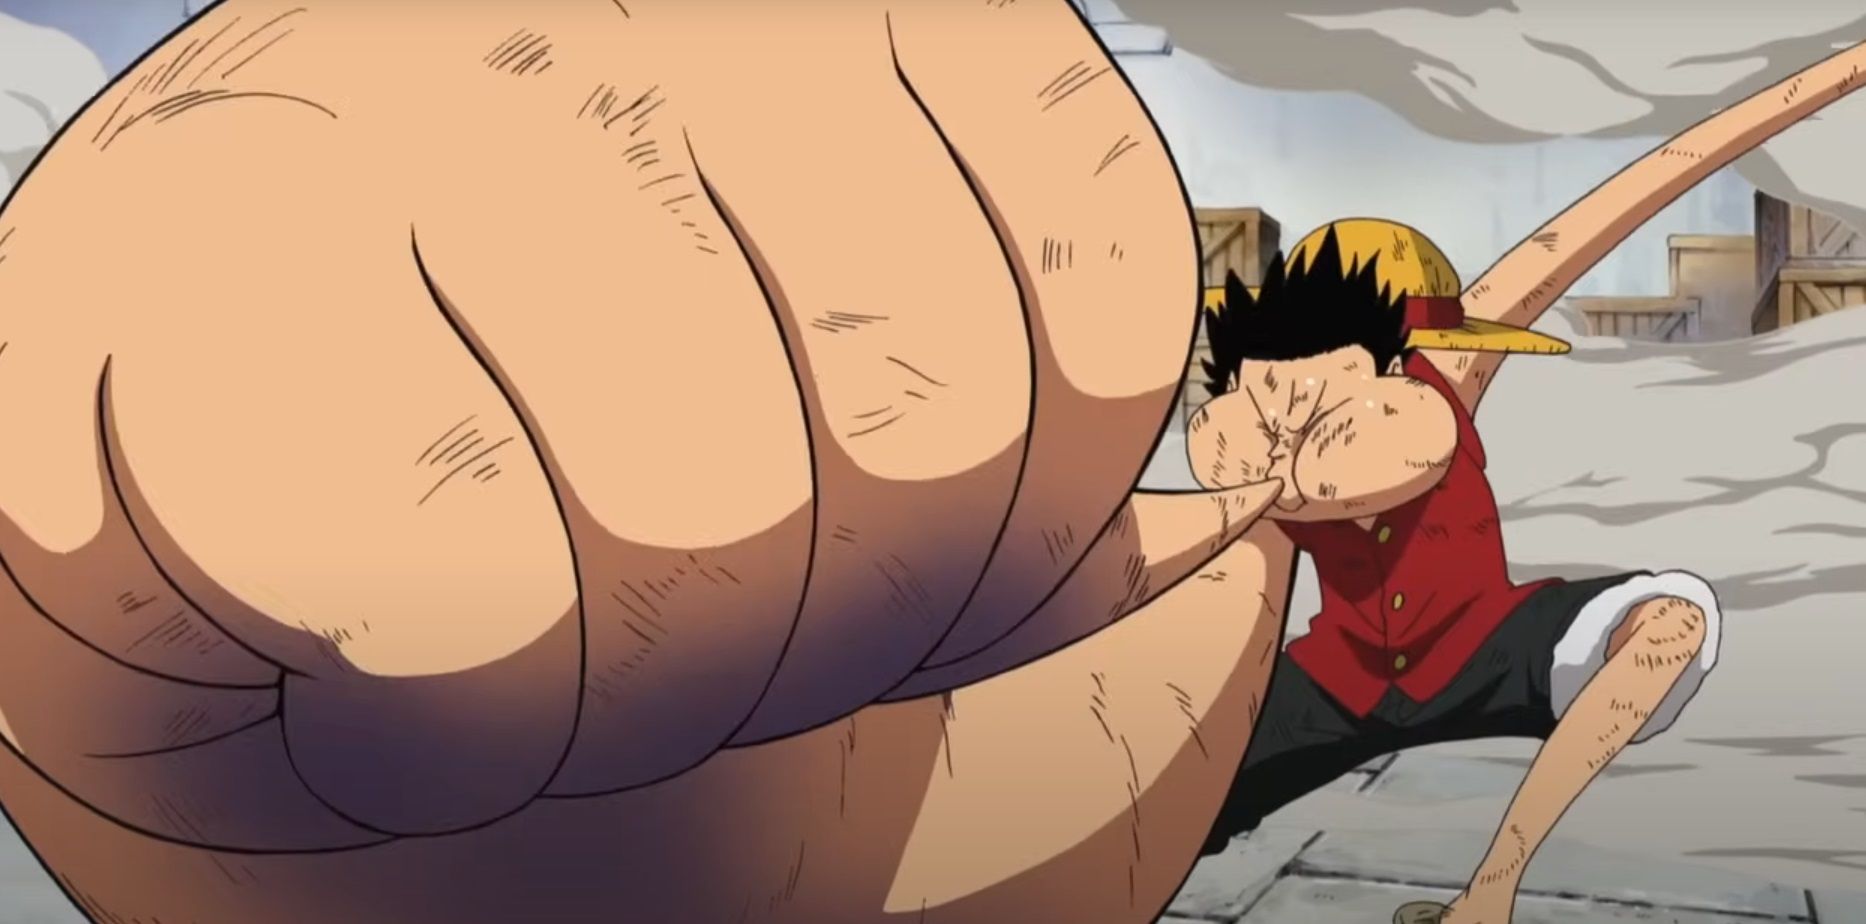 luffy blows up his hand with gear 3